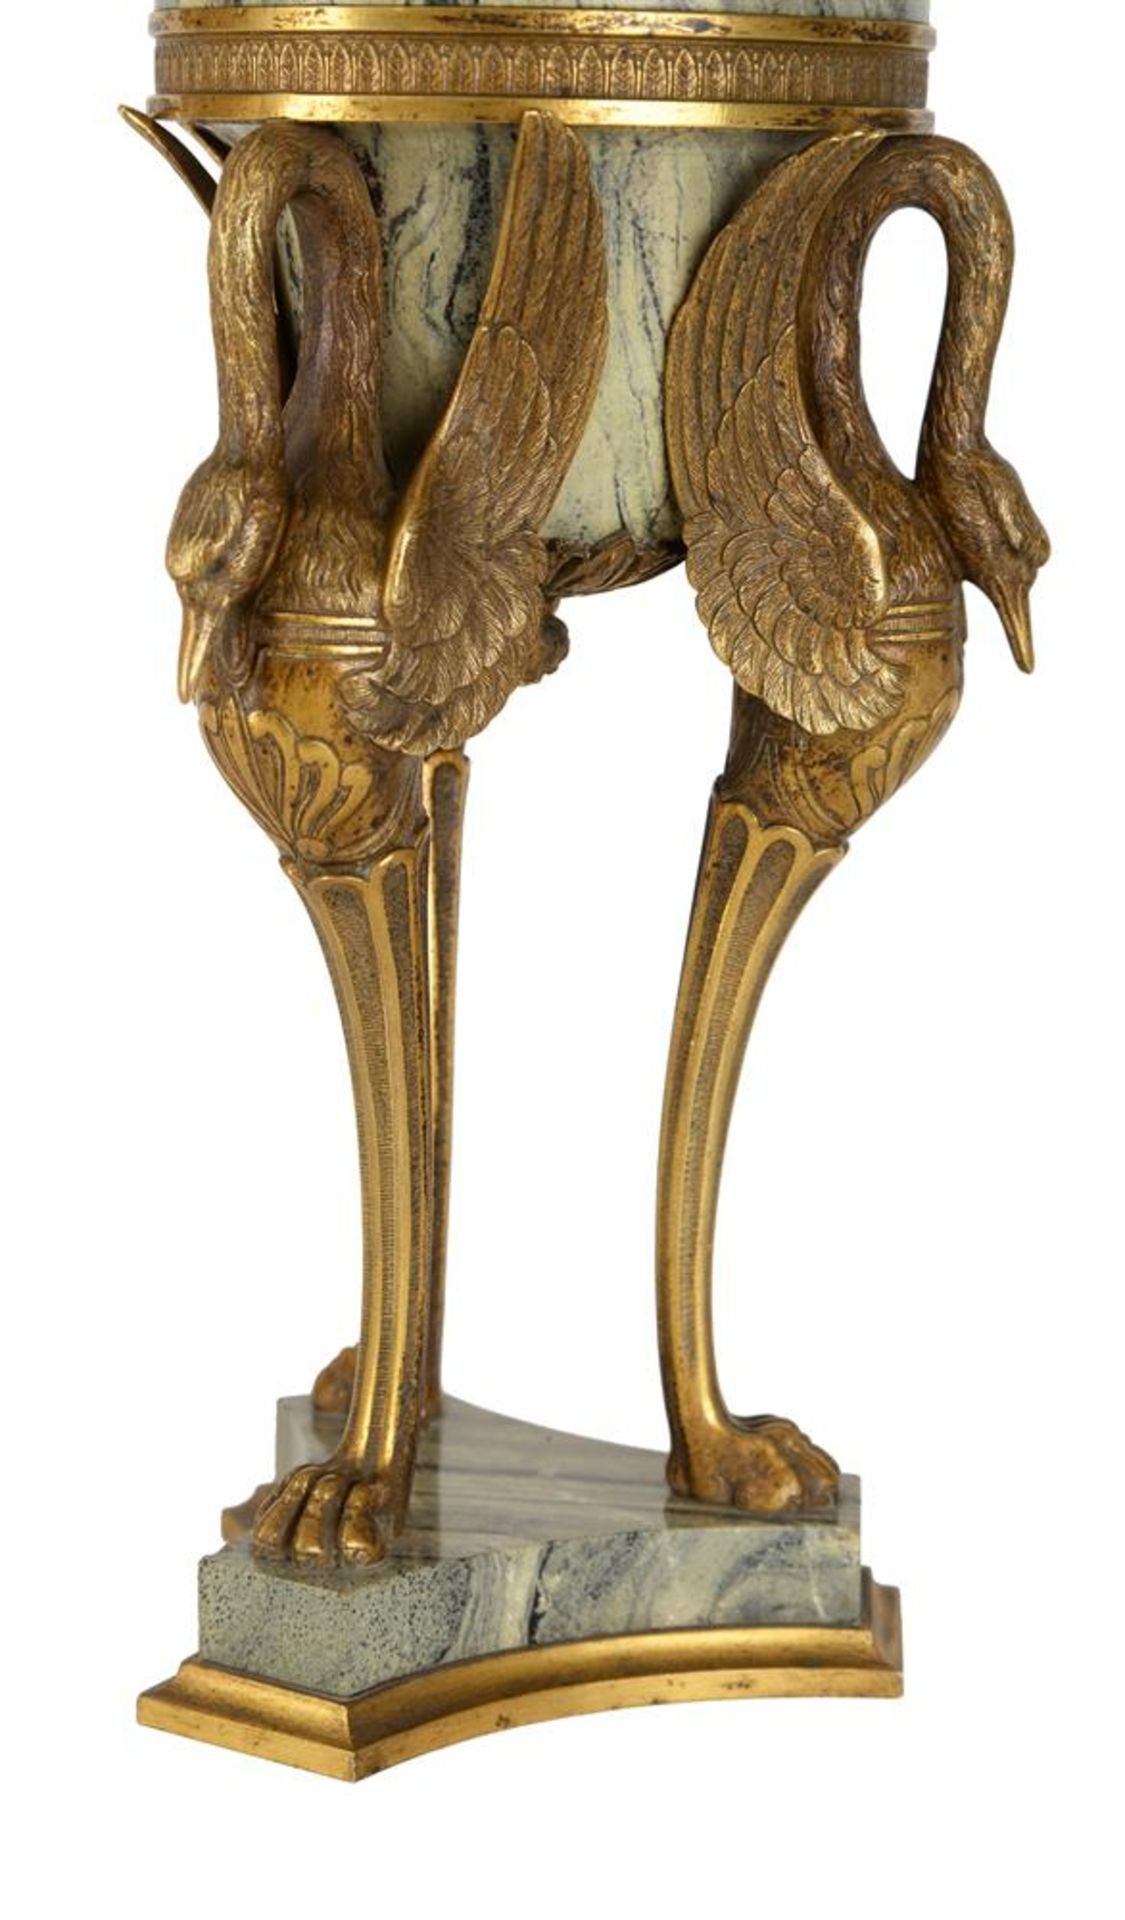 A PAIR OF FRENCH ORMOLU AND CIPOLLINO MARBLE URNS, LATE 19TH CENTURY - Image 4 of 4